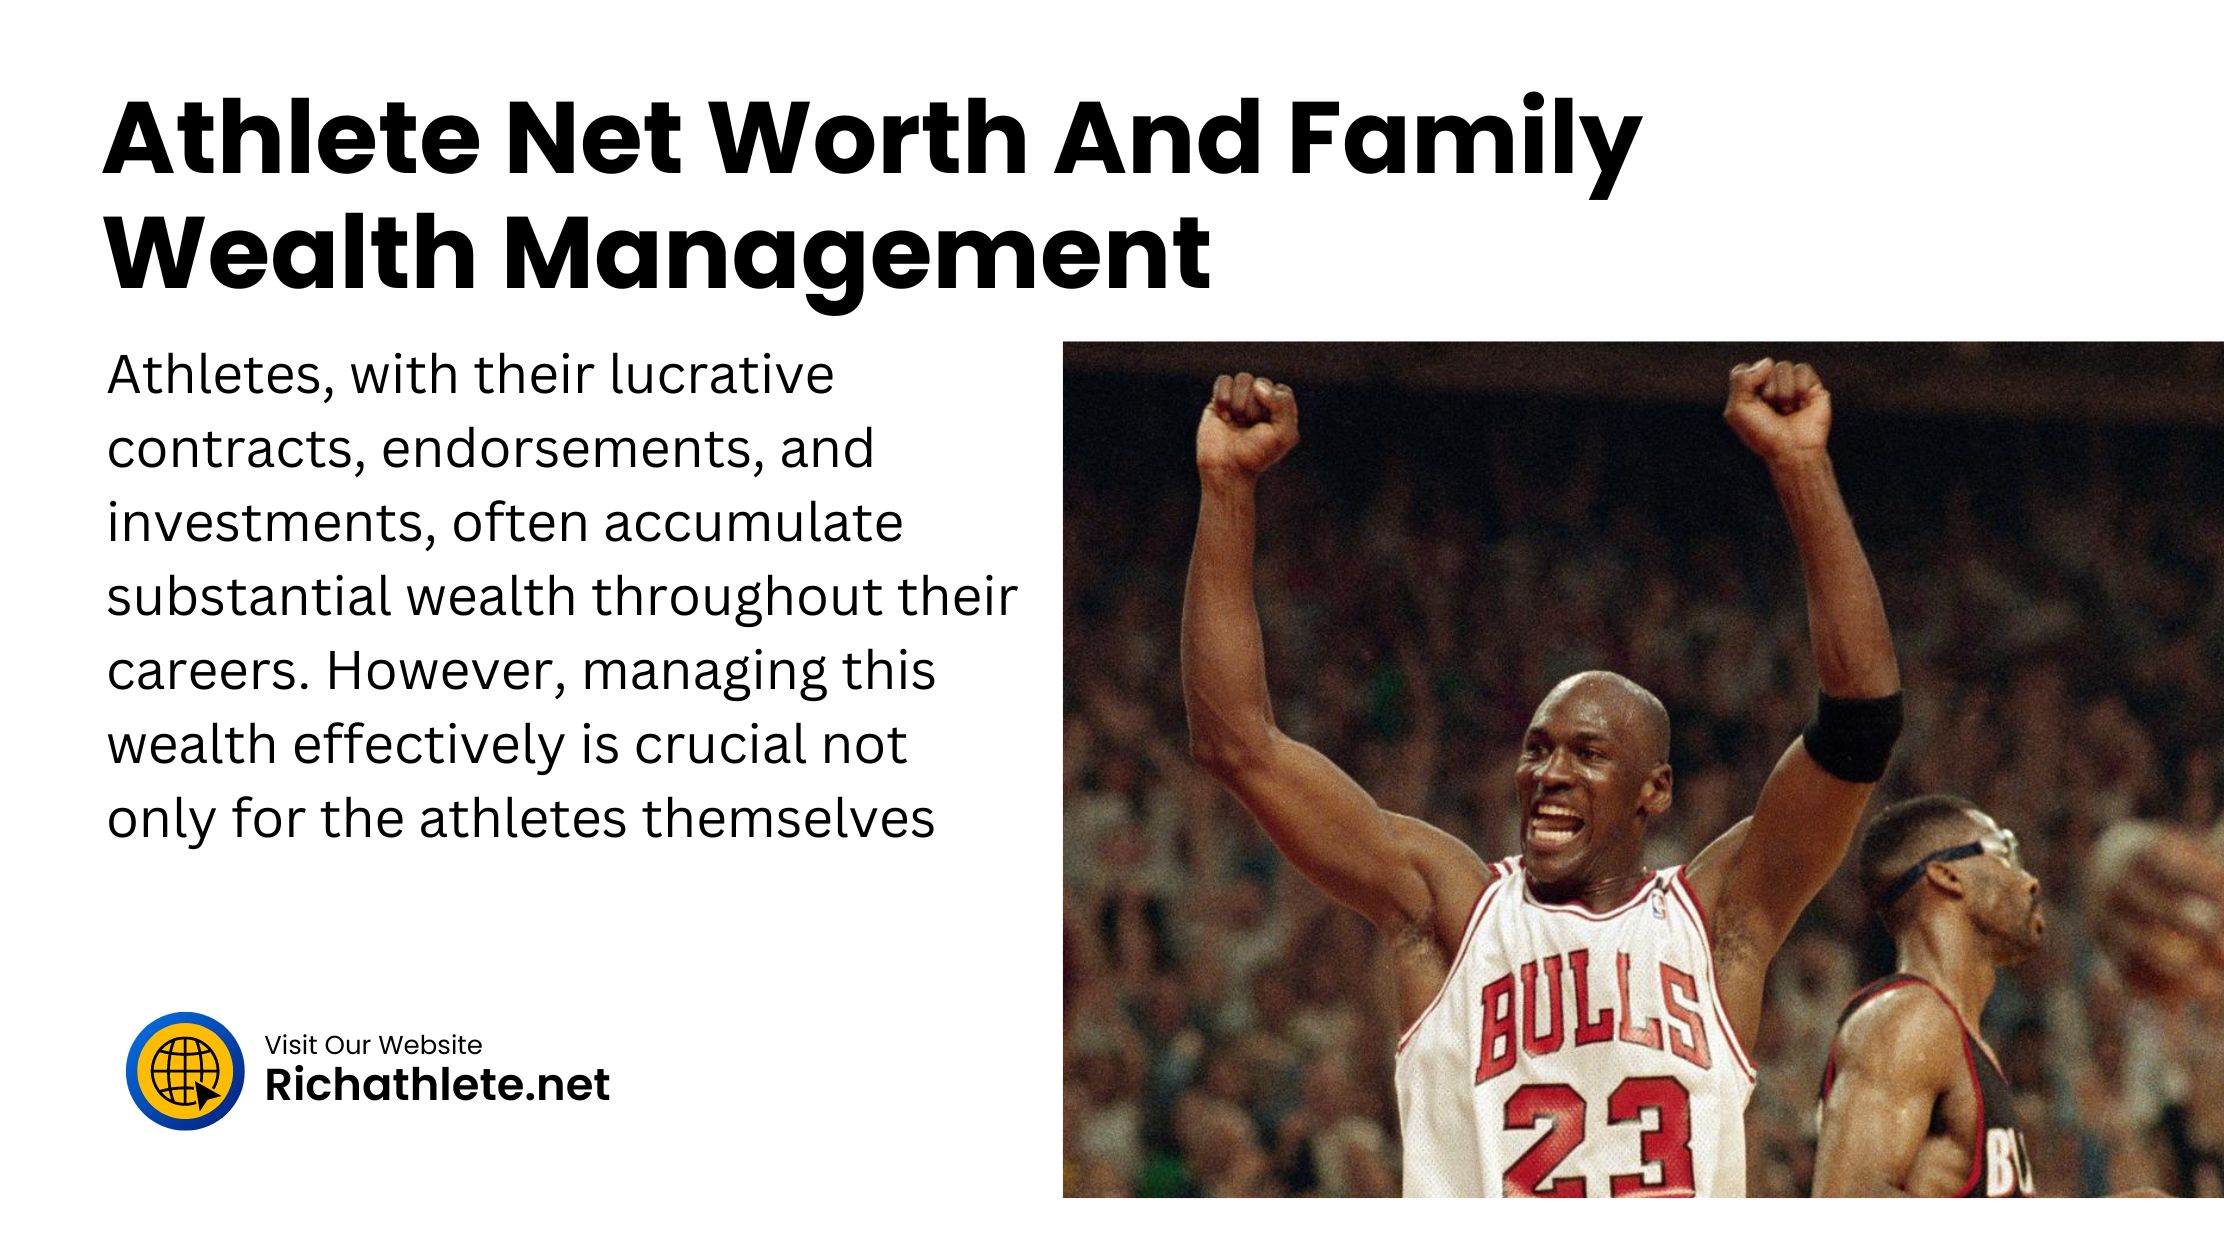 Athlete Net Worth And Family Wealth Management